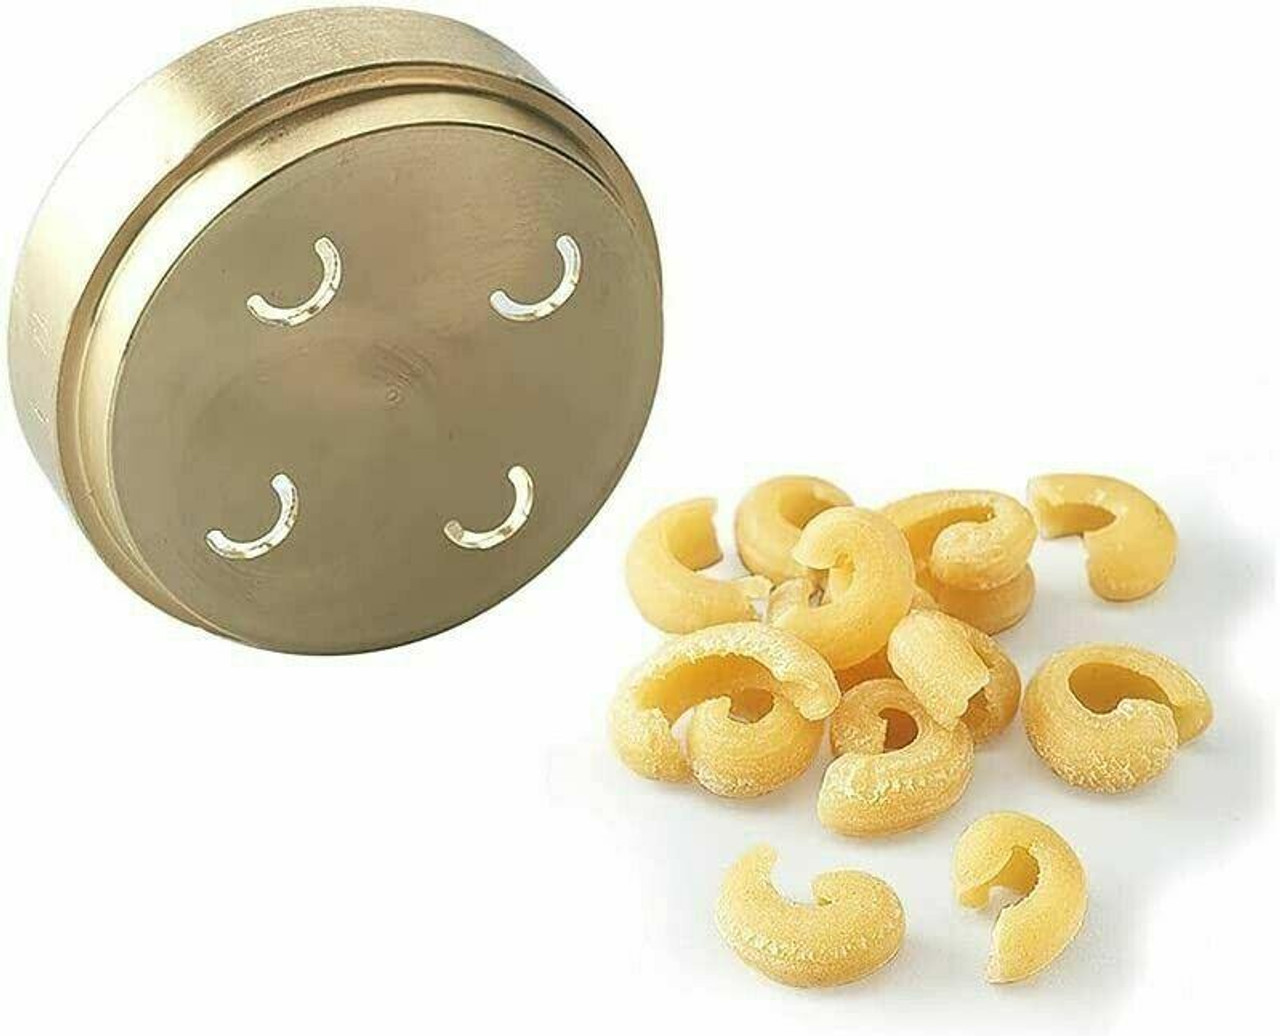 https://cdn11.bigcommerce.com/s-h6dda16069/images/stencil/1280x1280/products/2936/14265/kenwood-kenwood-spaccatelli-pasta-shaper-die-at910005-for-at910-kax910me-in-heidelberg__93082.1650202111.jpg?c=1&imbypass=on